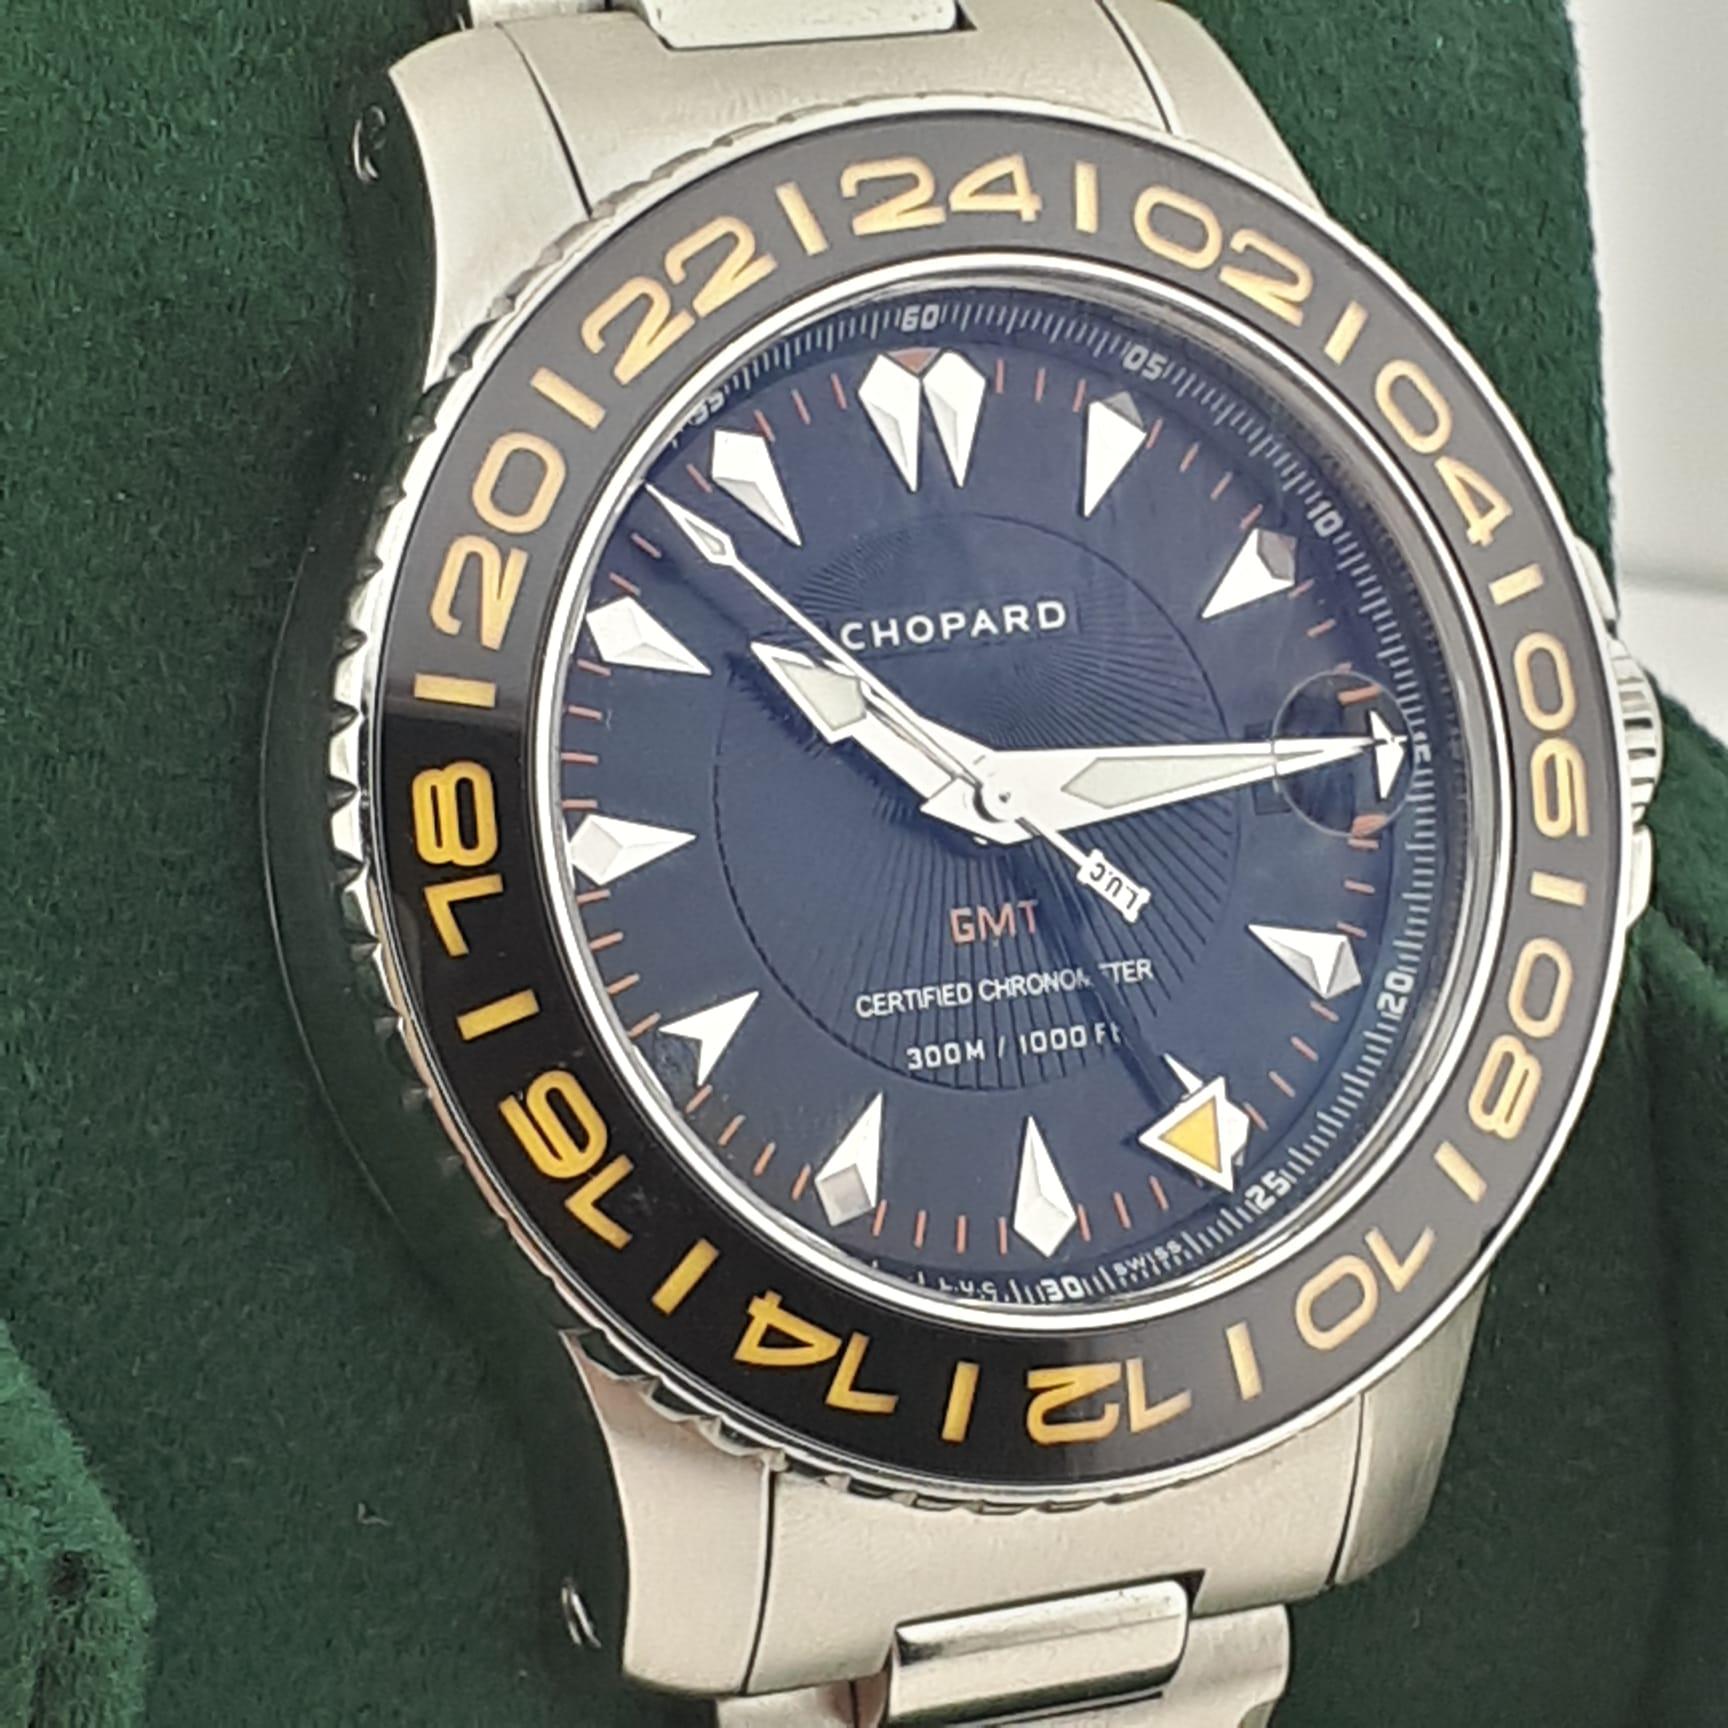  ****   Automatic , 43mm case size,  Original Box, Original Certificate, 300m Water Proof

Brand: Chopard  (Guaranteed Authentic)
Model: L.U.C. Pro One GMT Diver 
Reference Number: 16/8959
Gender: Men's
Metal: Steel
Case Size: 43mm excluding winding